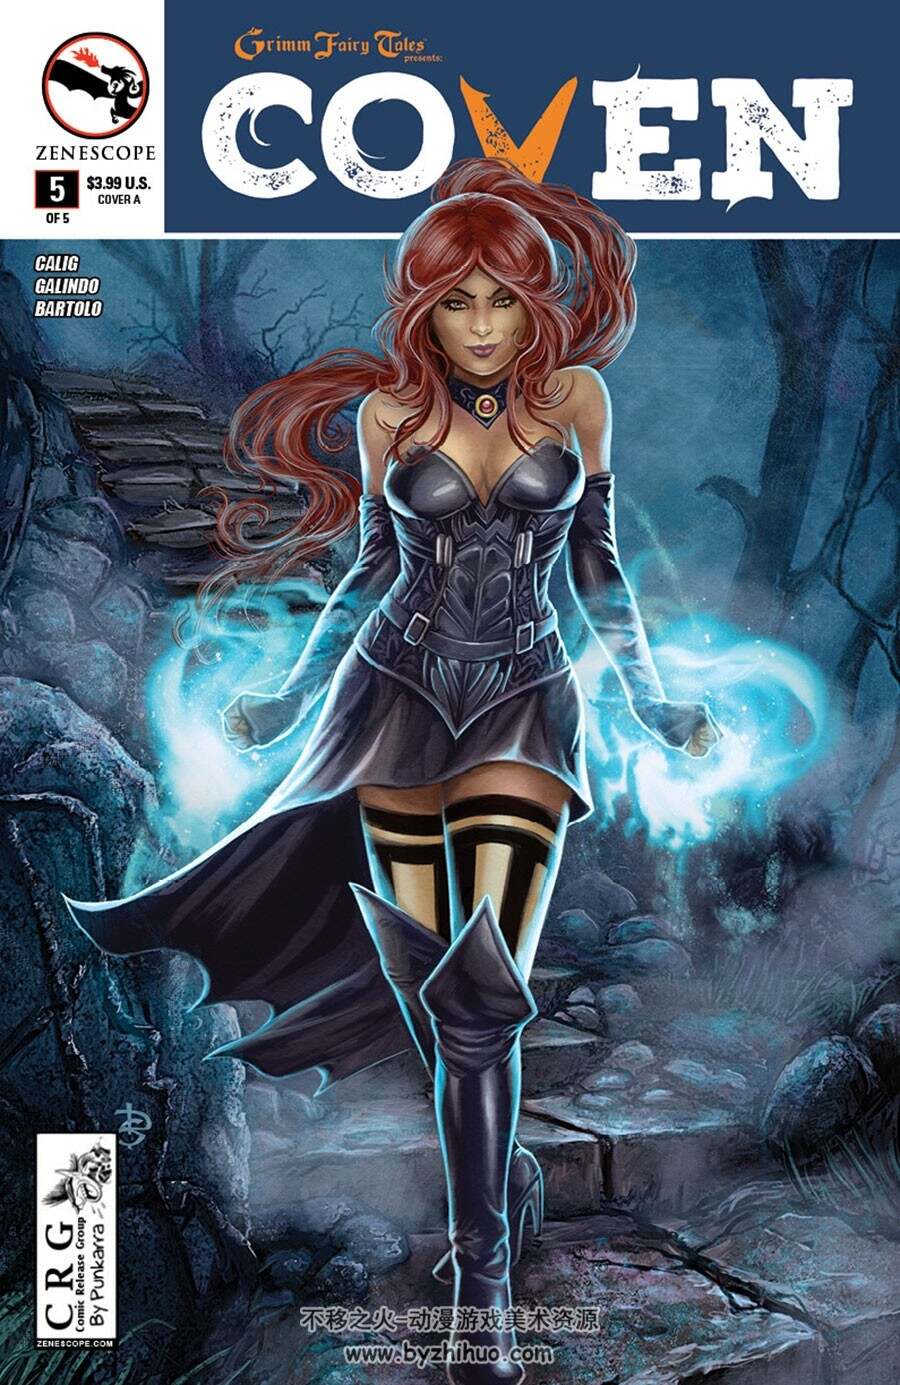 Grimm Fairy Tales Presents - Coven 1-5册 Zach Calig - Diego Galindo - Michael Bar